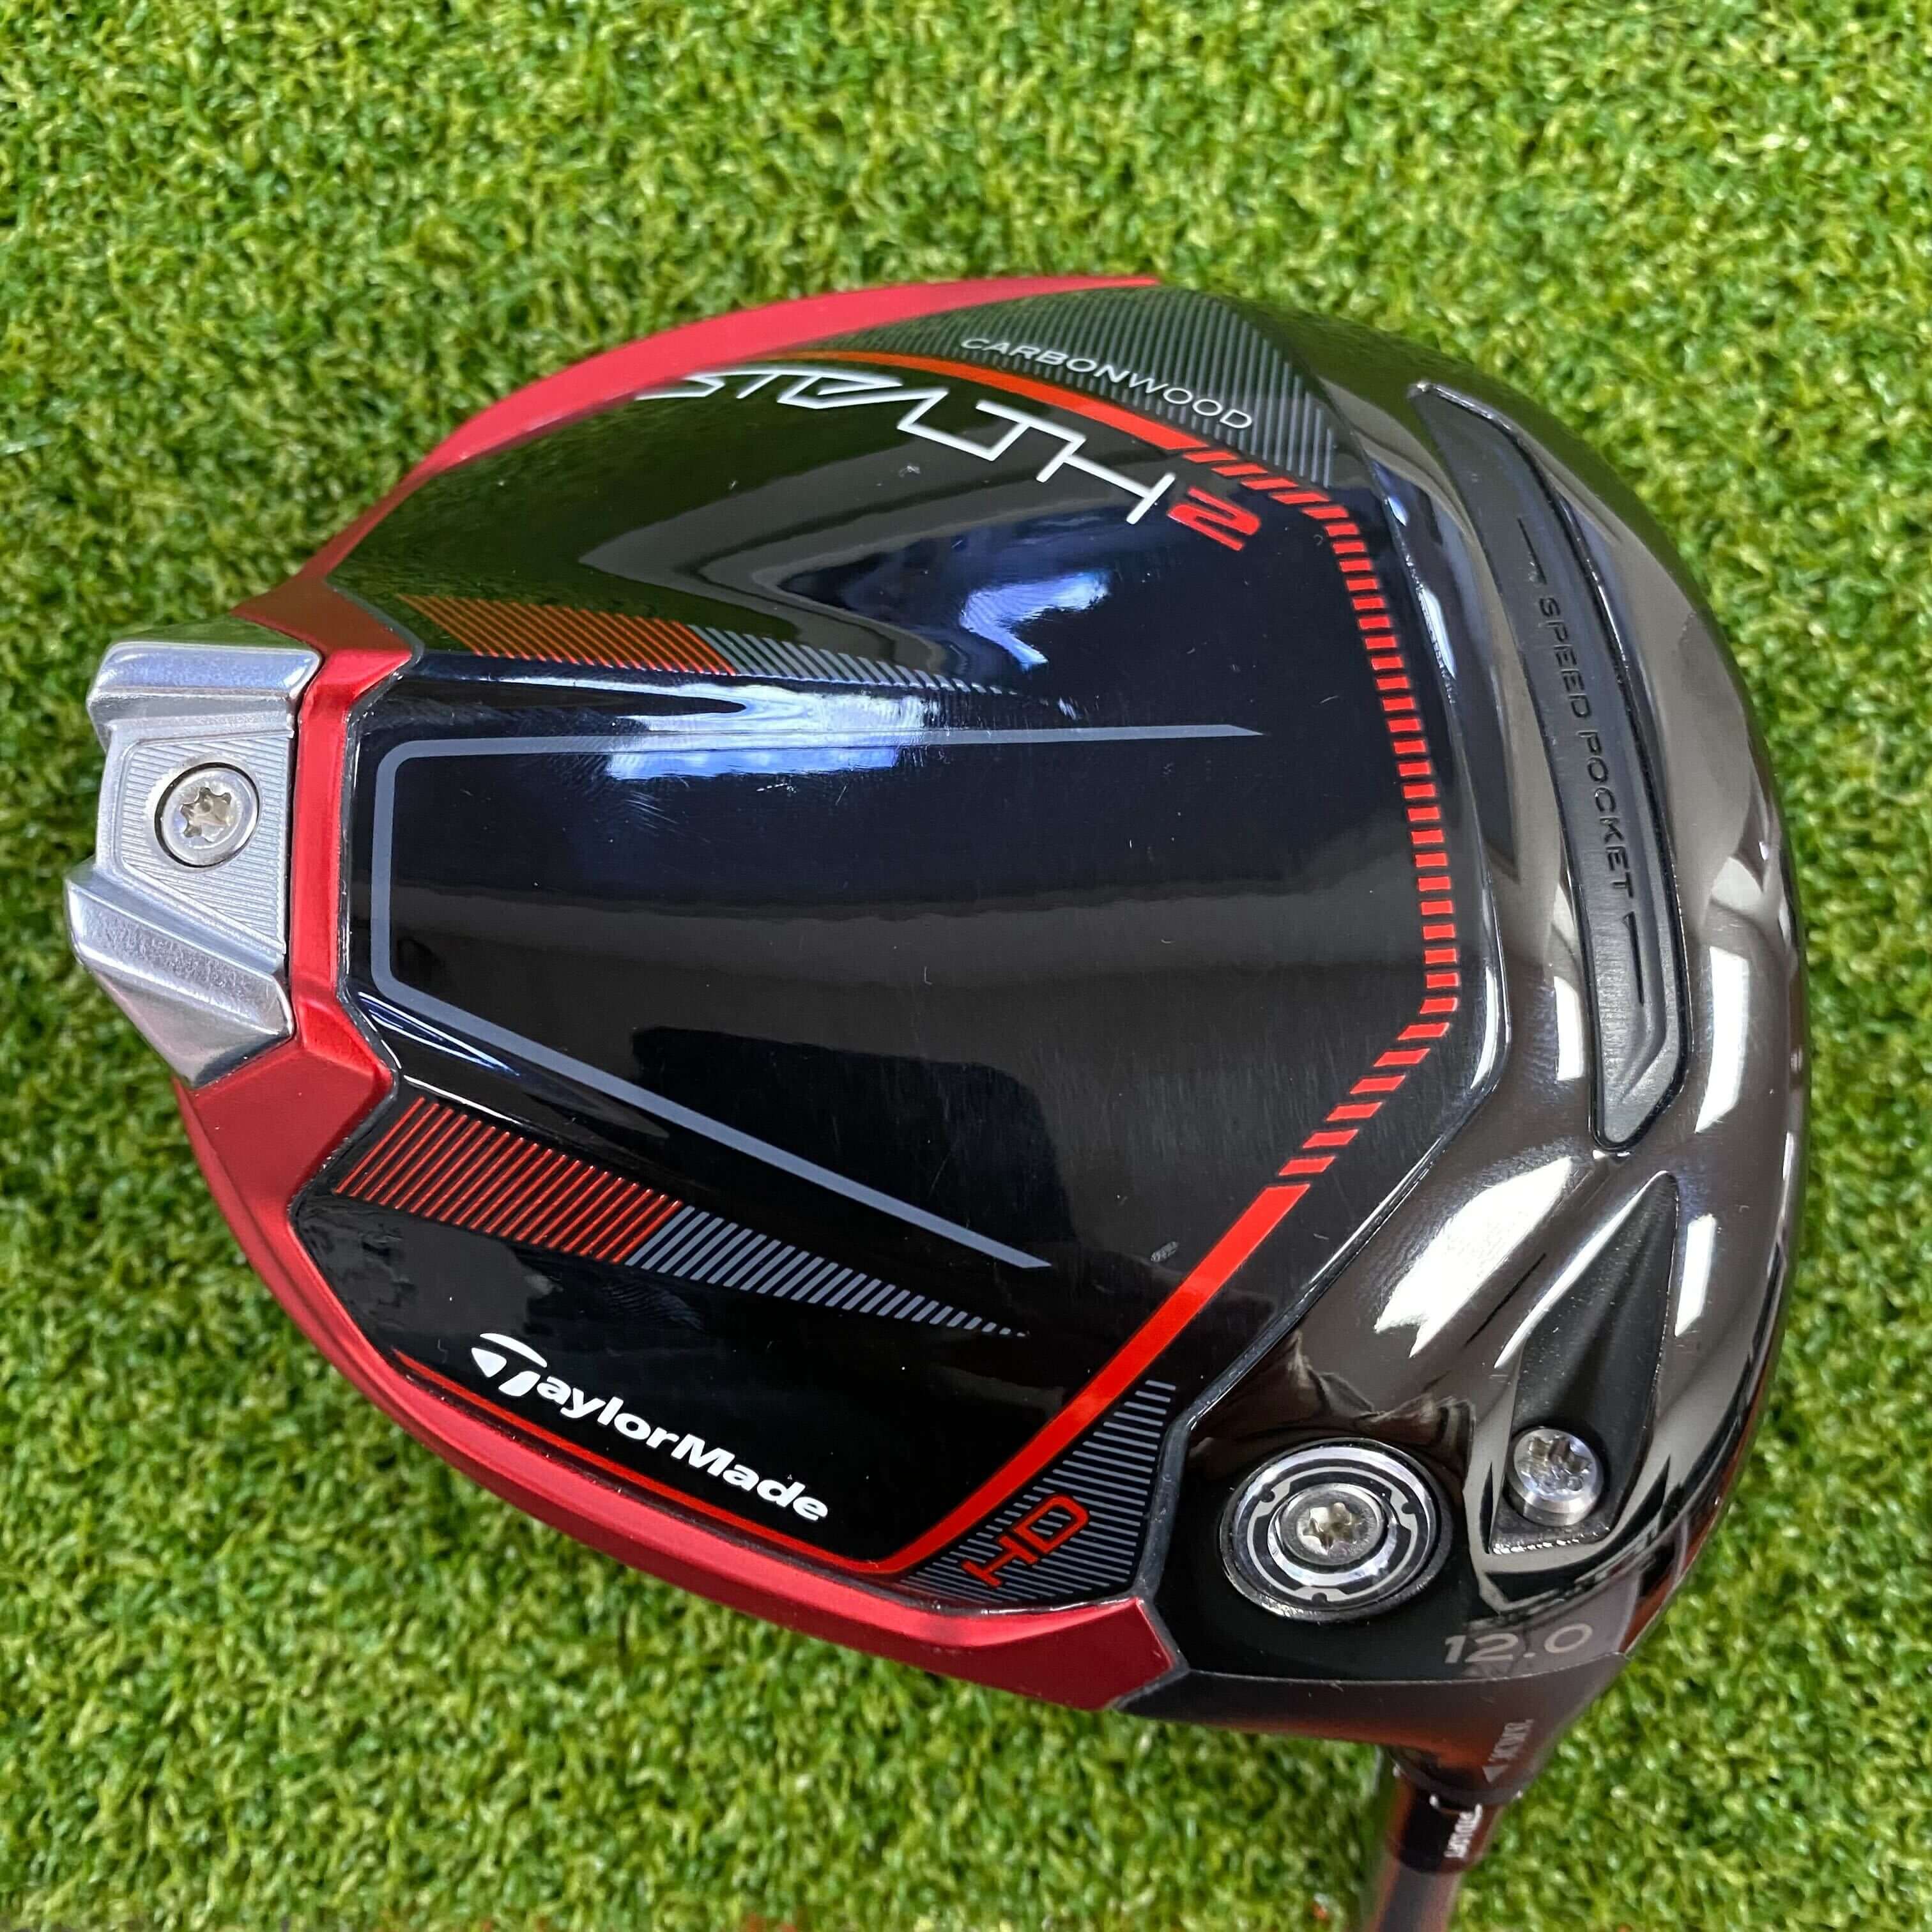 TaylorMade Stealth 2 HD Golf Driver - Used